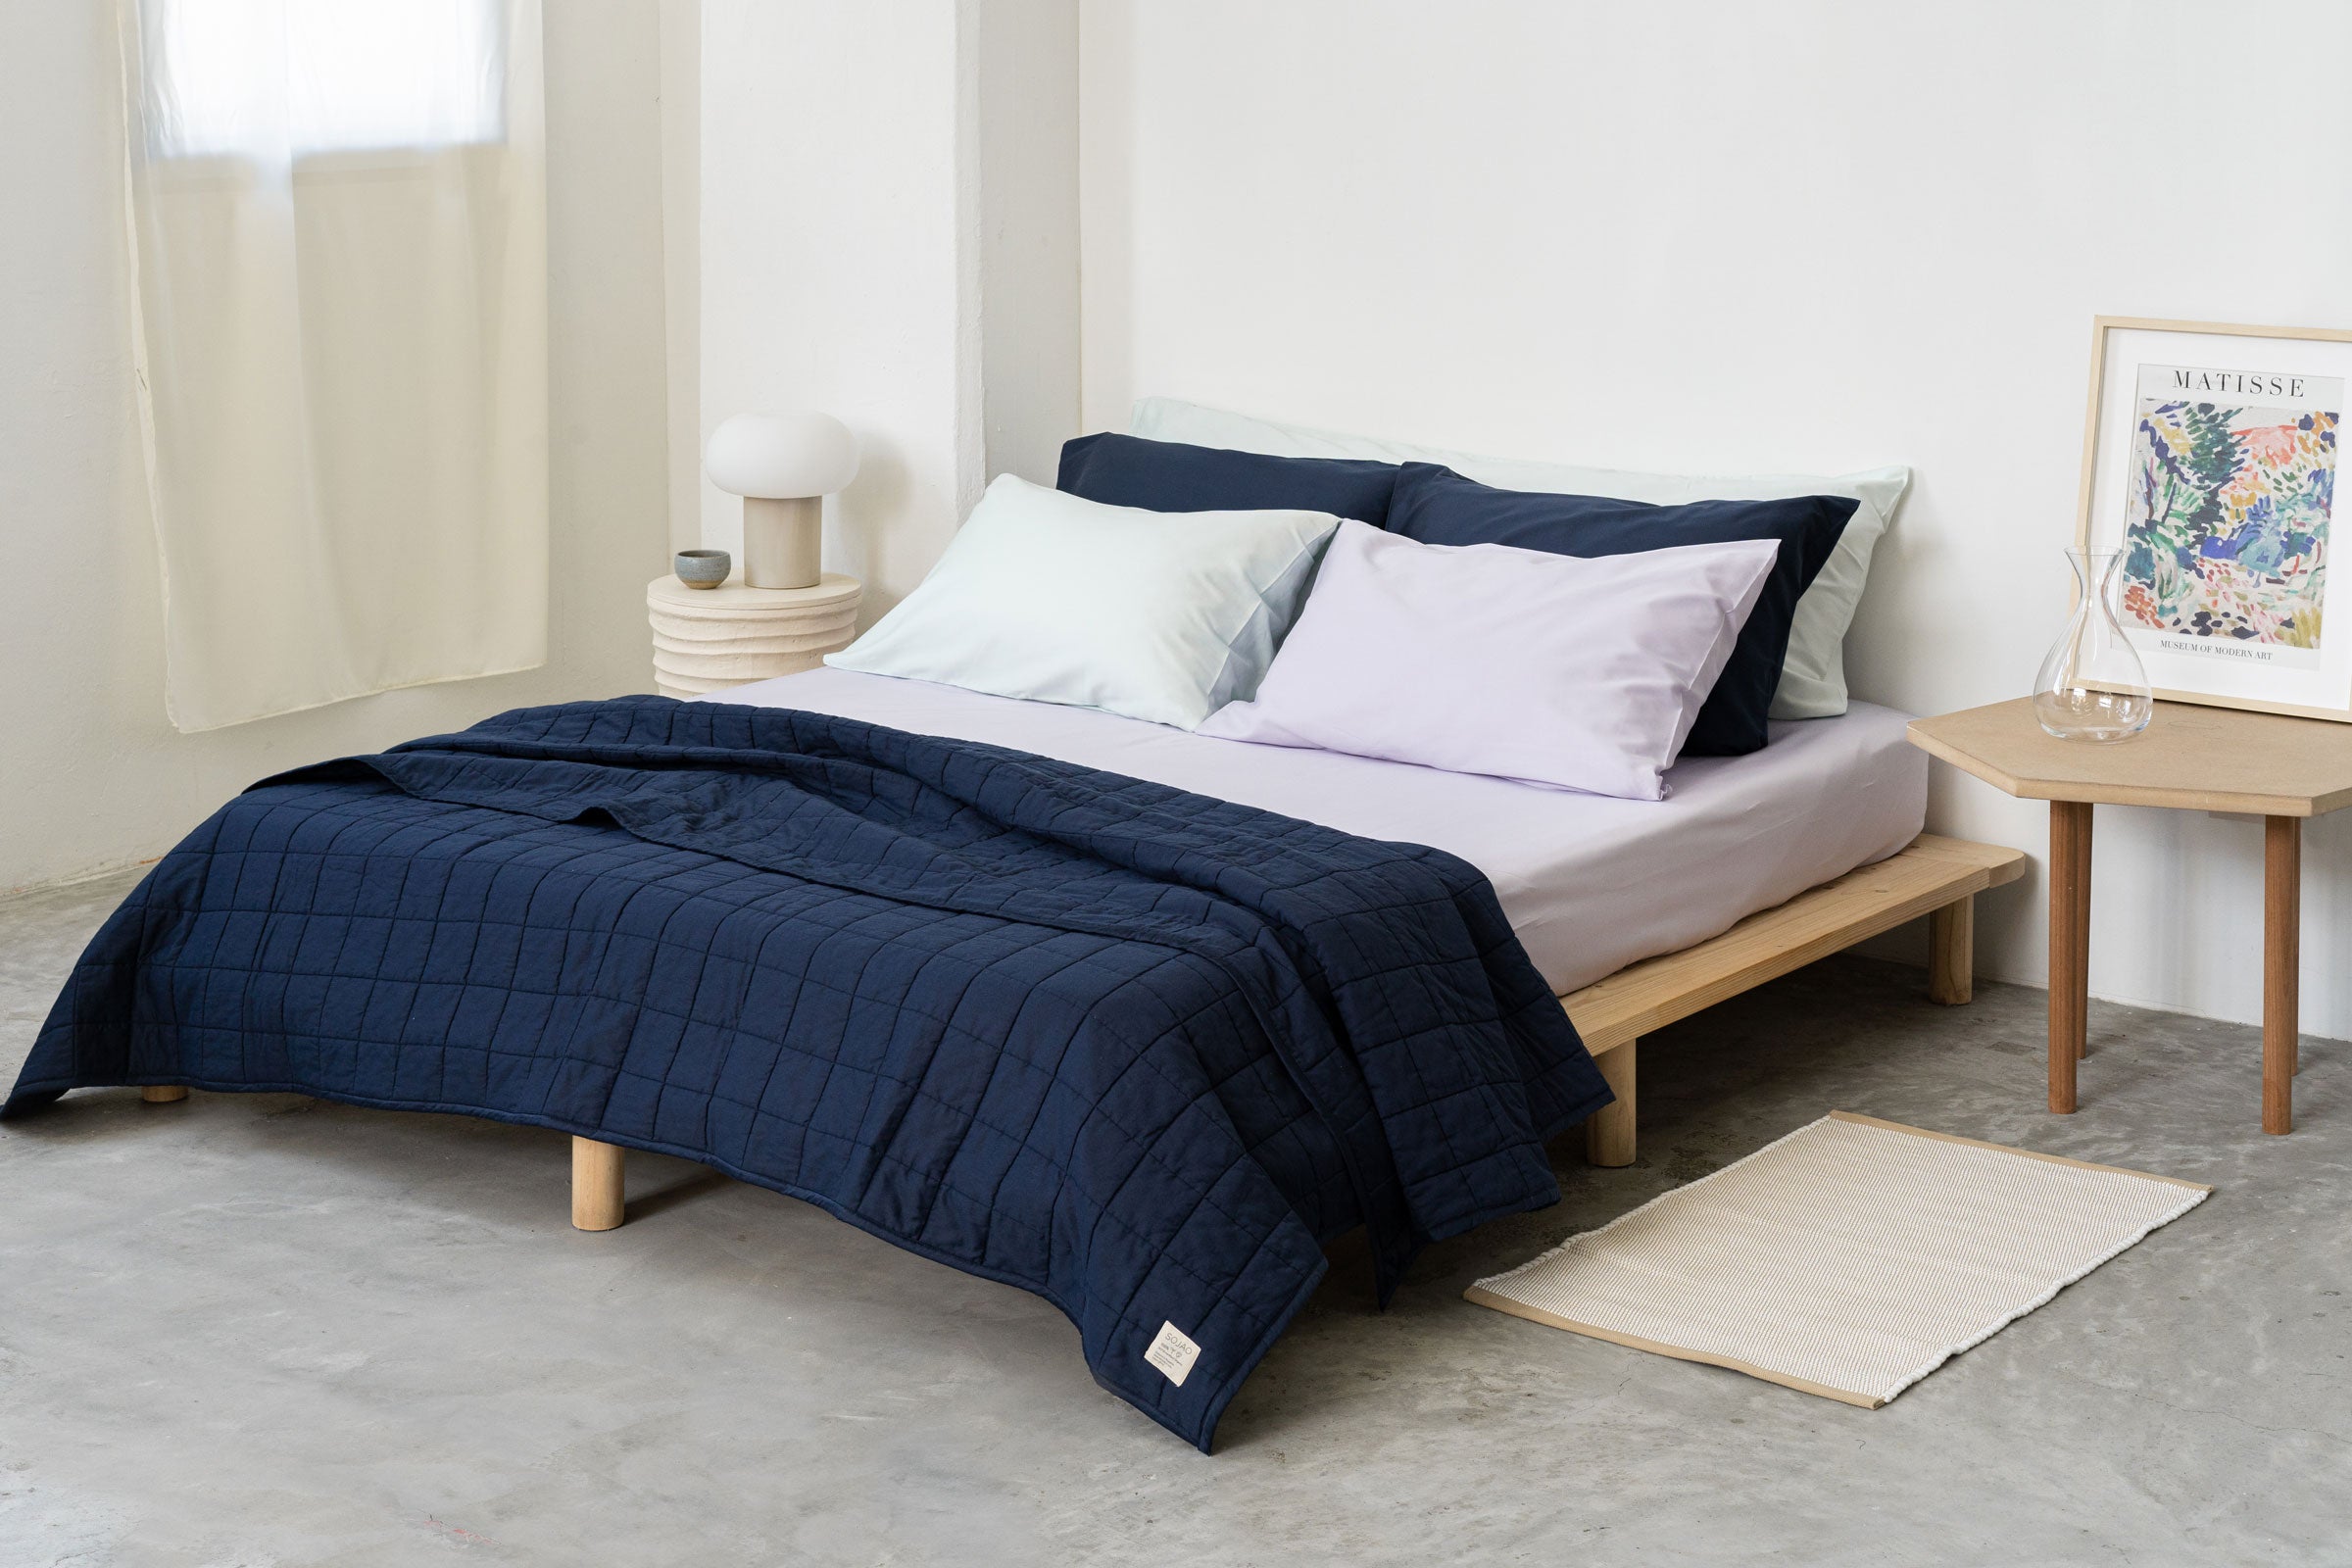 navy-organic-cotton-quilt-side-wide-shot-by-sojao.jpg